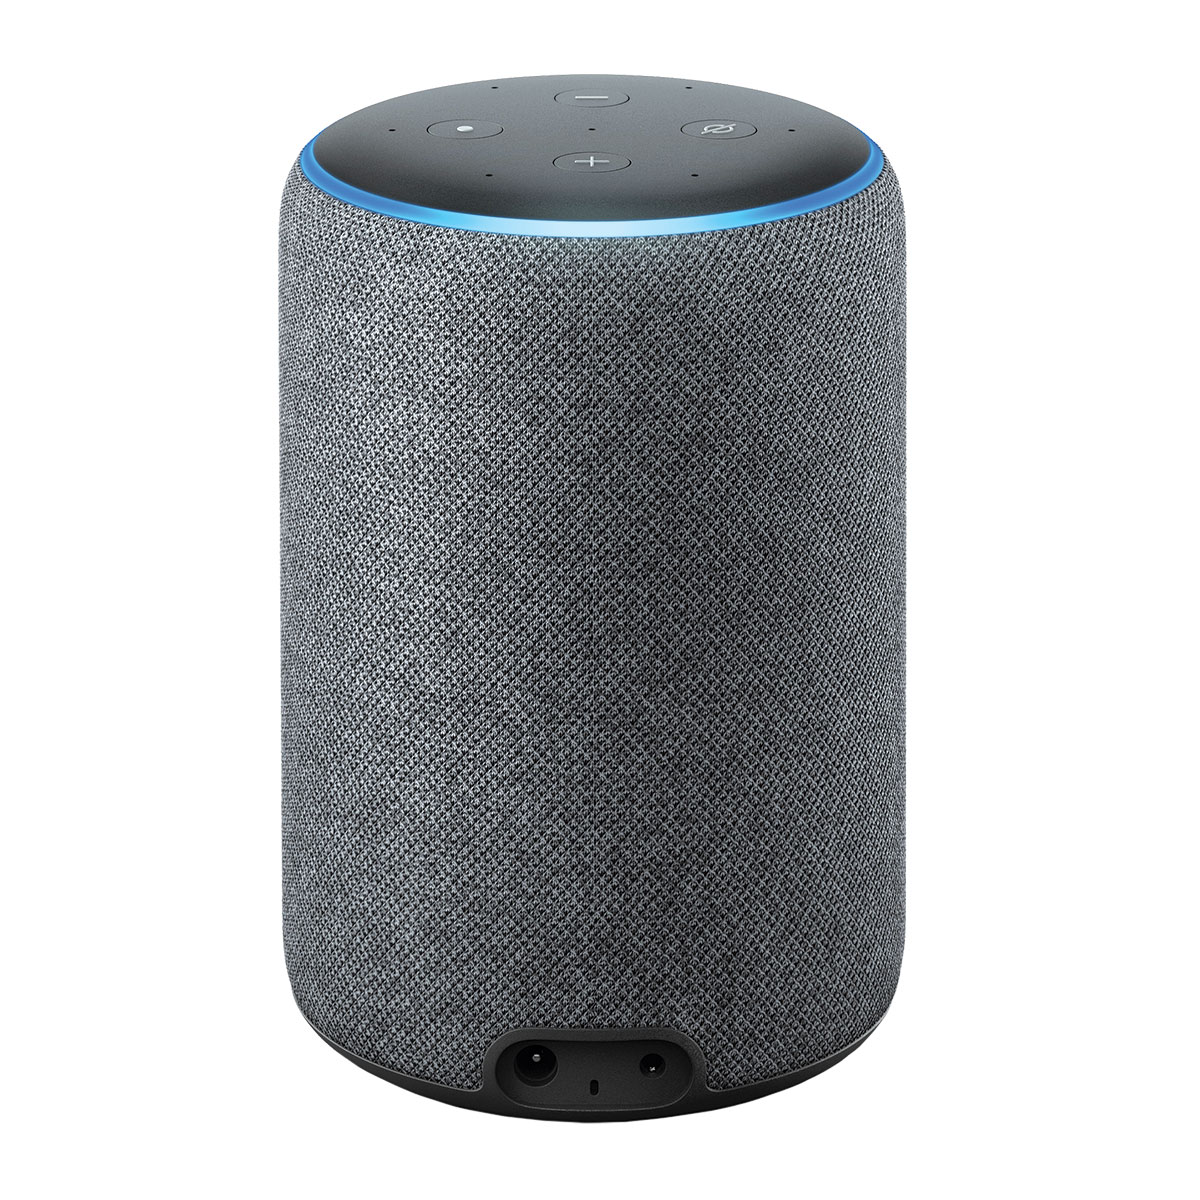  Apple, Google Eavesdropping: Should You Ditch Your Smart Speaker?